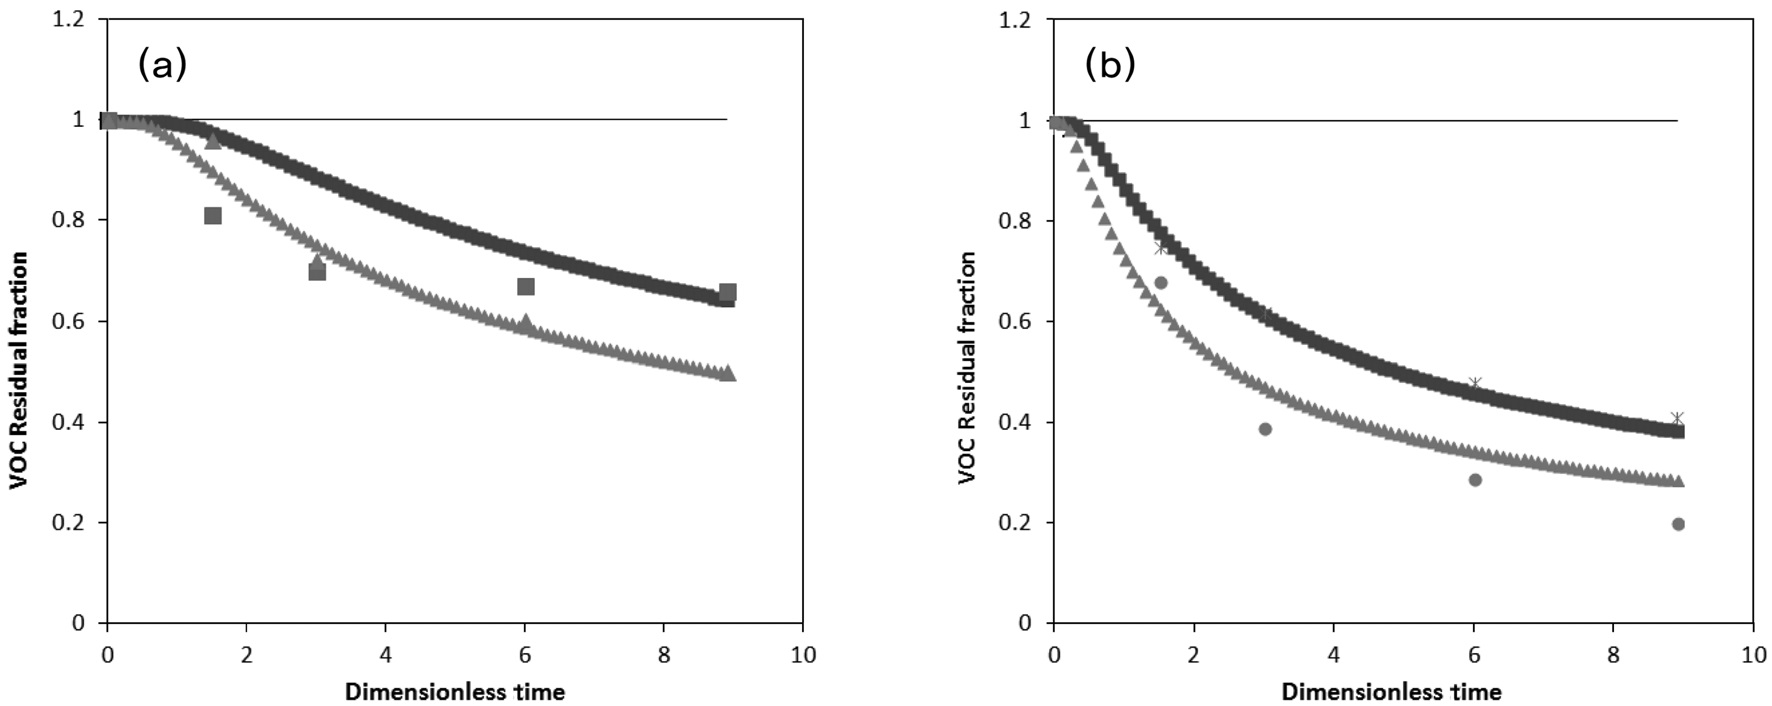 Comparison of the dynamic adsorption model with the experiment. The left shows adsorption onto pure gypsum surfaces, and the right represents that on surfaces with 50% of oyster powder. The upper curves stand for formaldehyde and the lowers denote toluene. ■, formaldehyde (calculated); ▲, toluene (calculated); *, formaldehyde (experimented); ●, toluene (experimented).